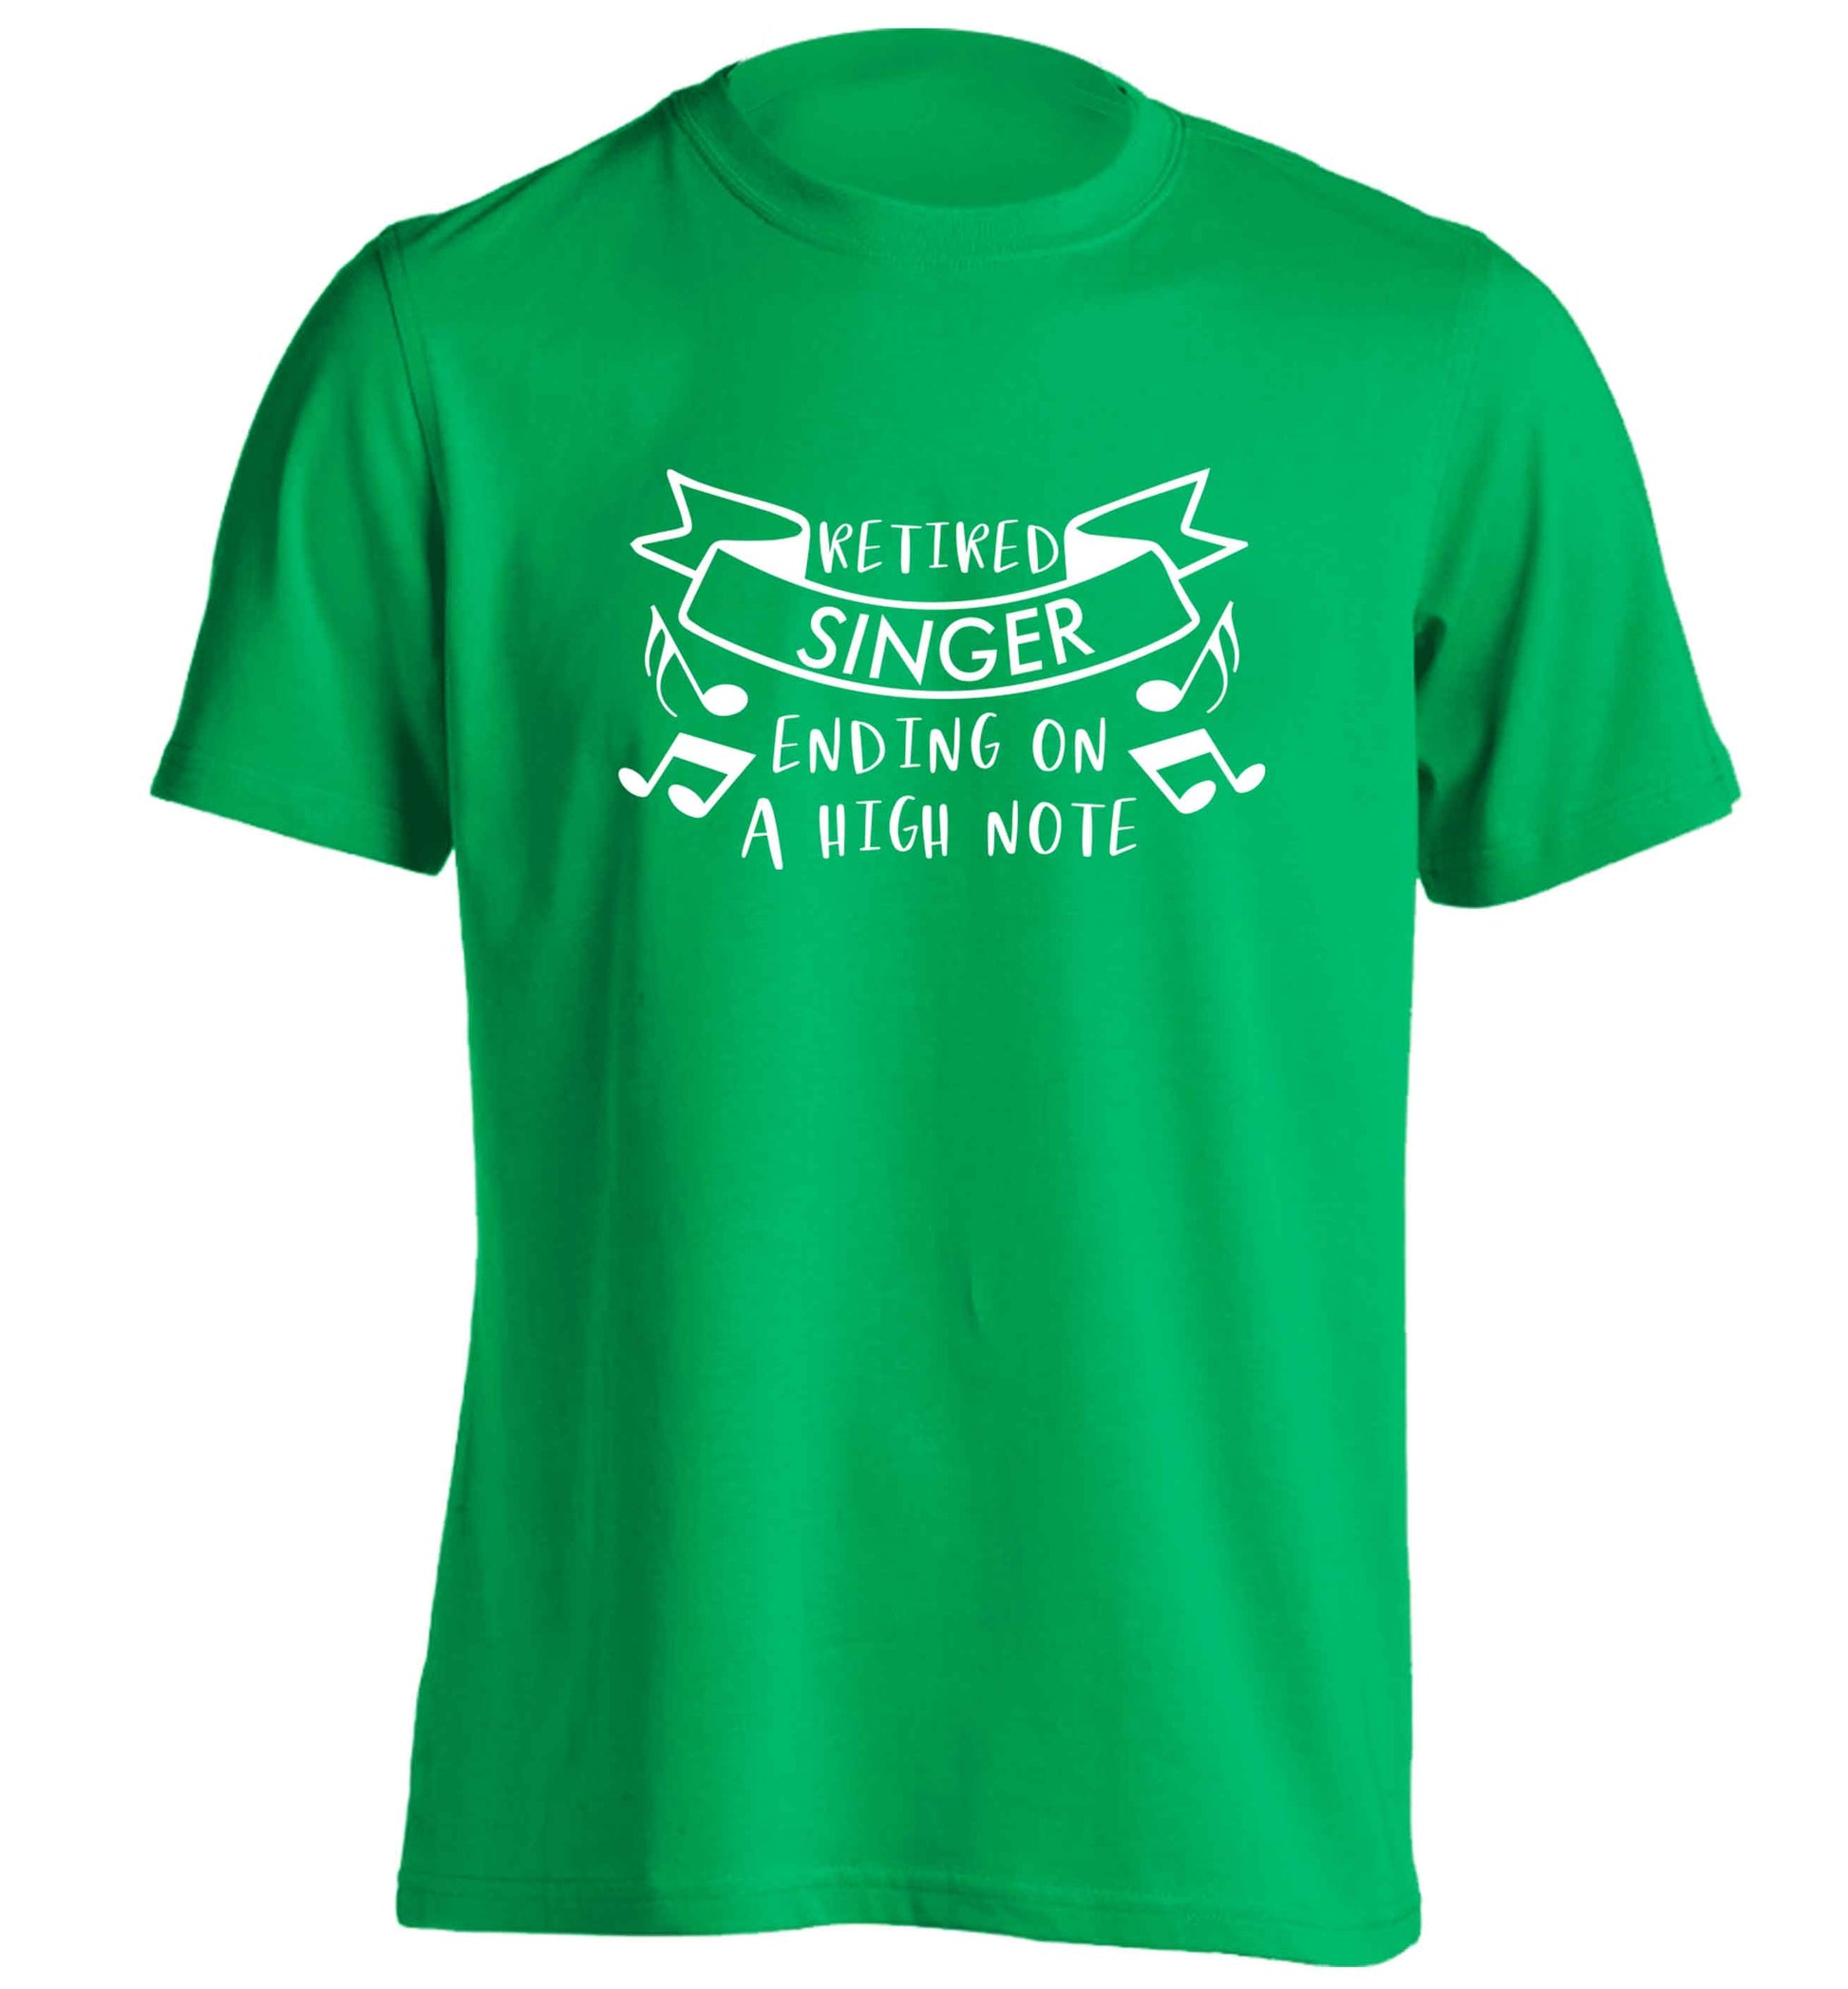 Retired singer ending on a high note adults unisex green Tshirt 2XL